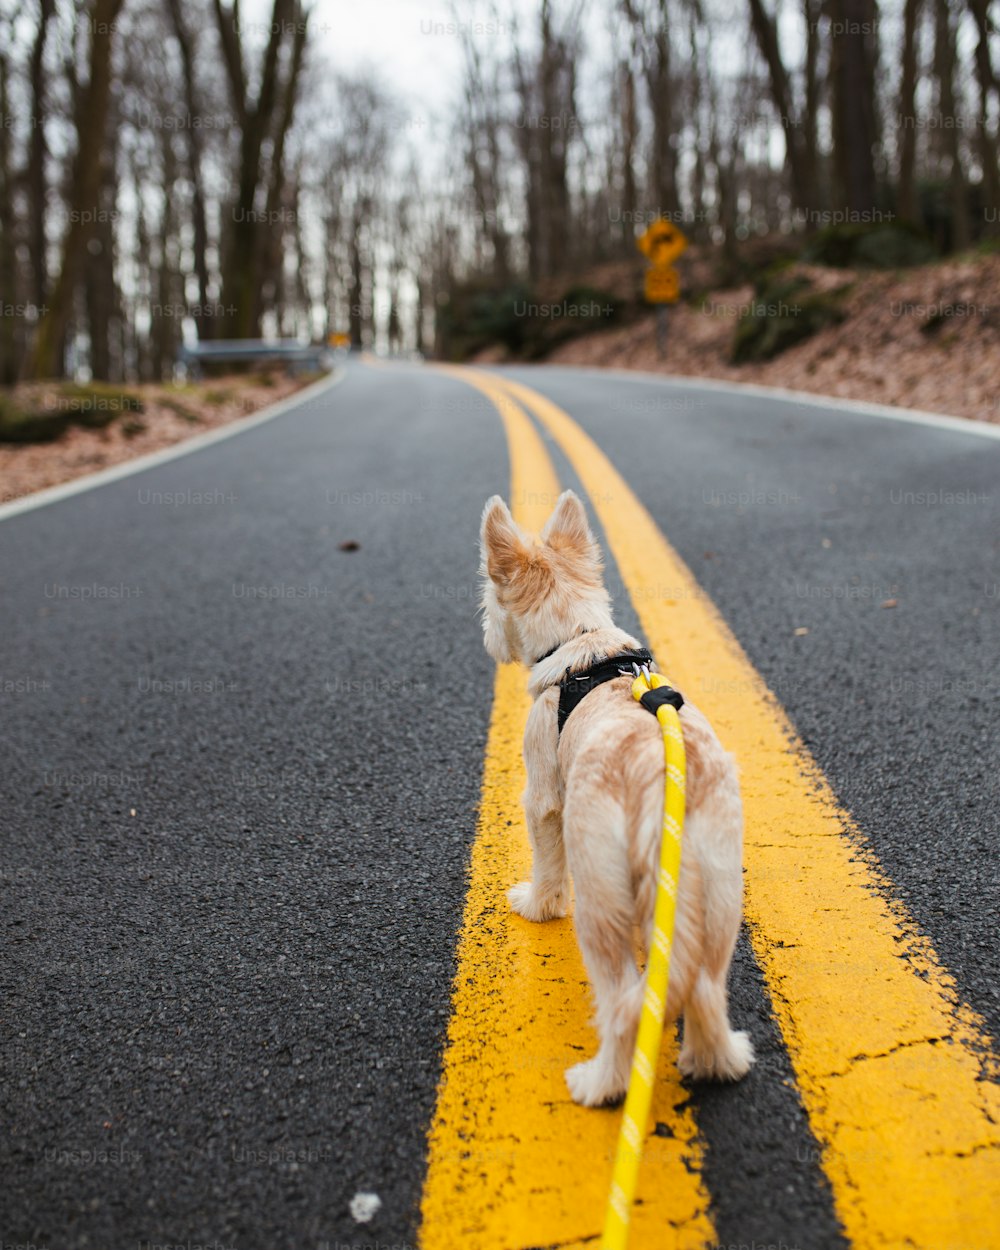 a dog on a leash on a road with trees on the side